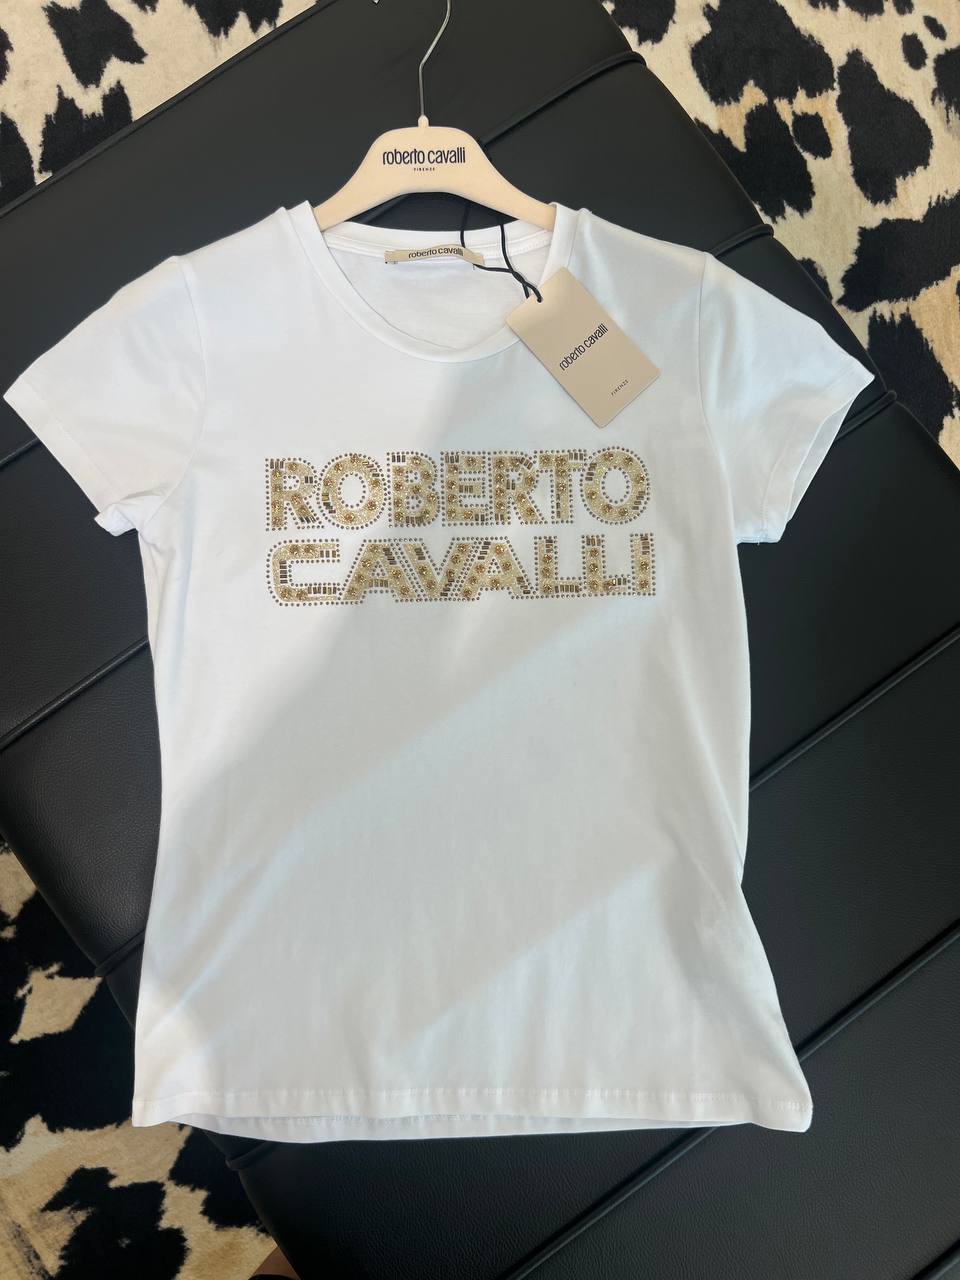 Roberto Cavalli Outlets 4386